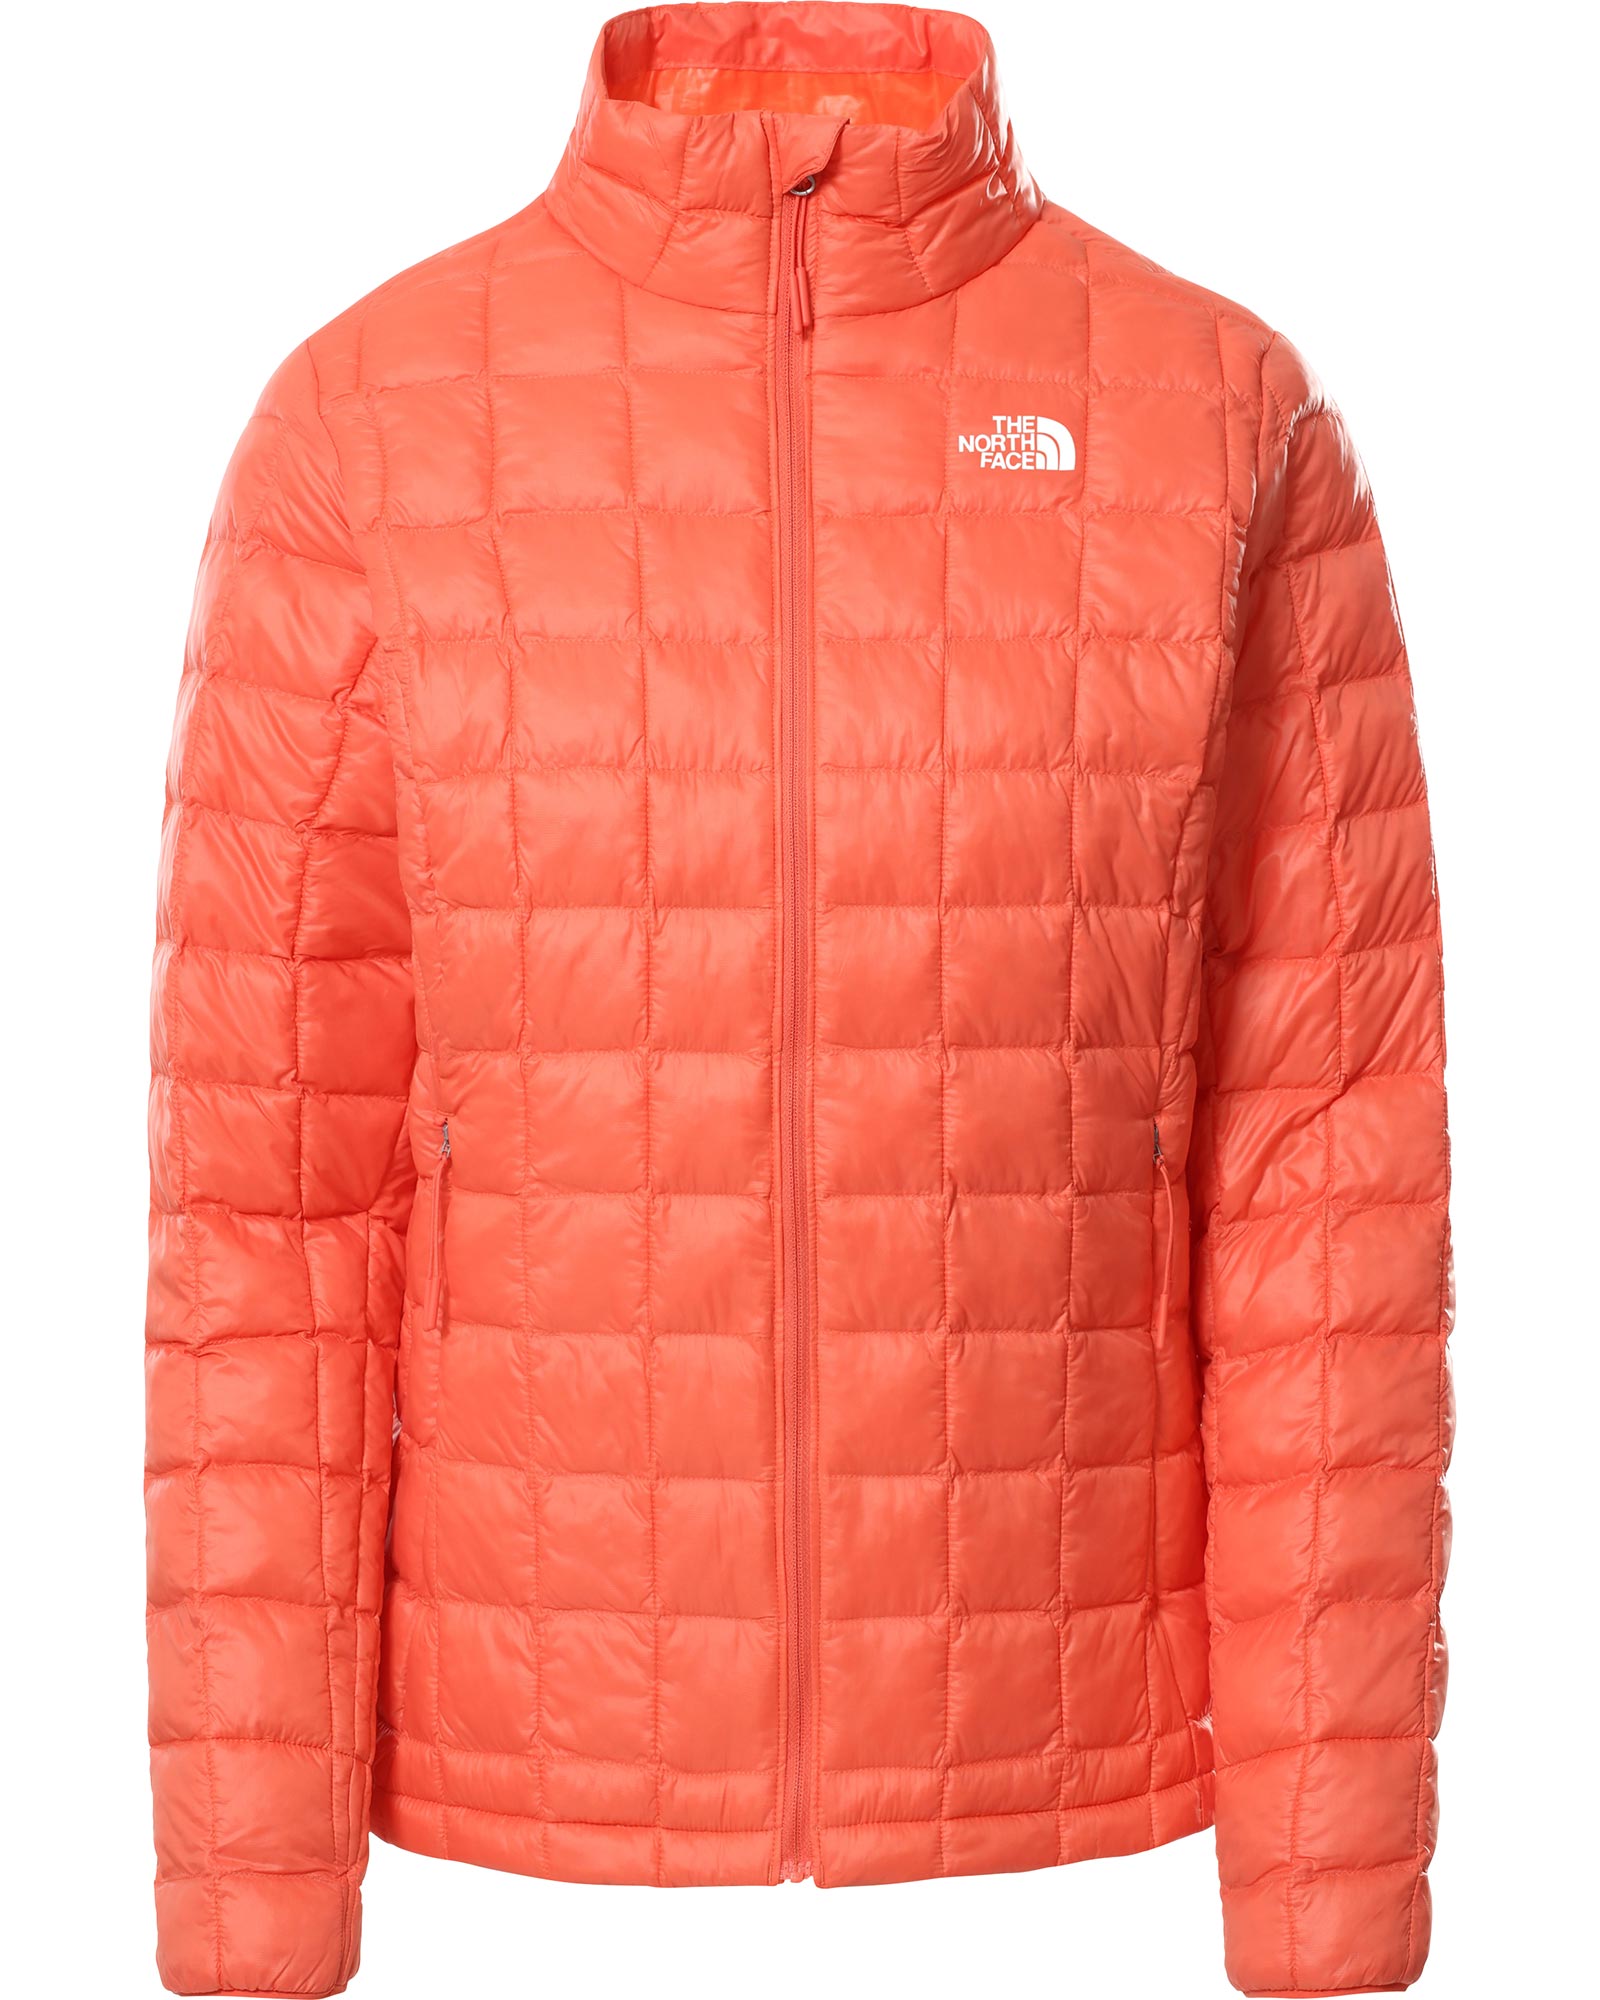 The North Face ThermoBall Eco Women’s Jacket - Emberglow Orange XS